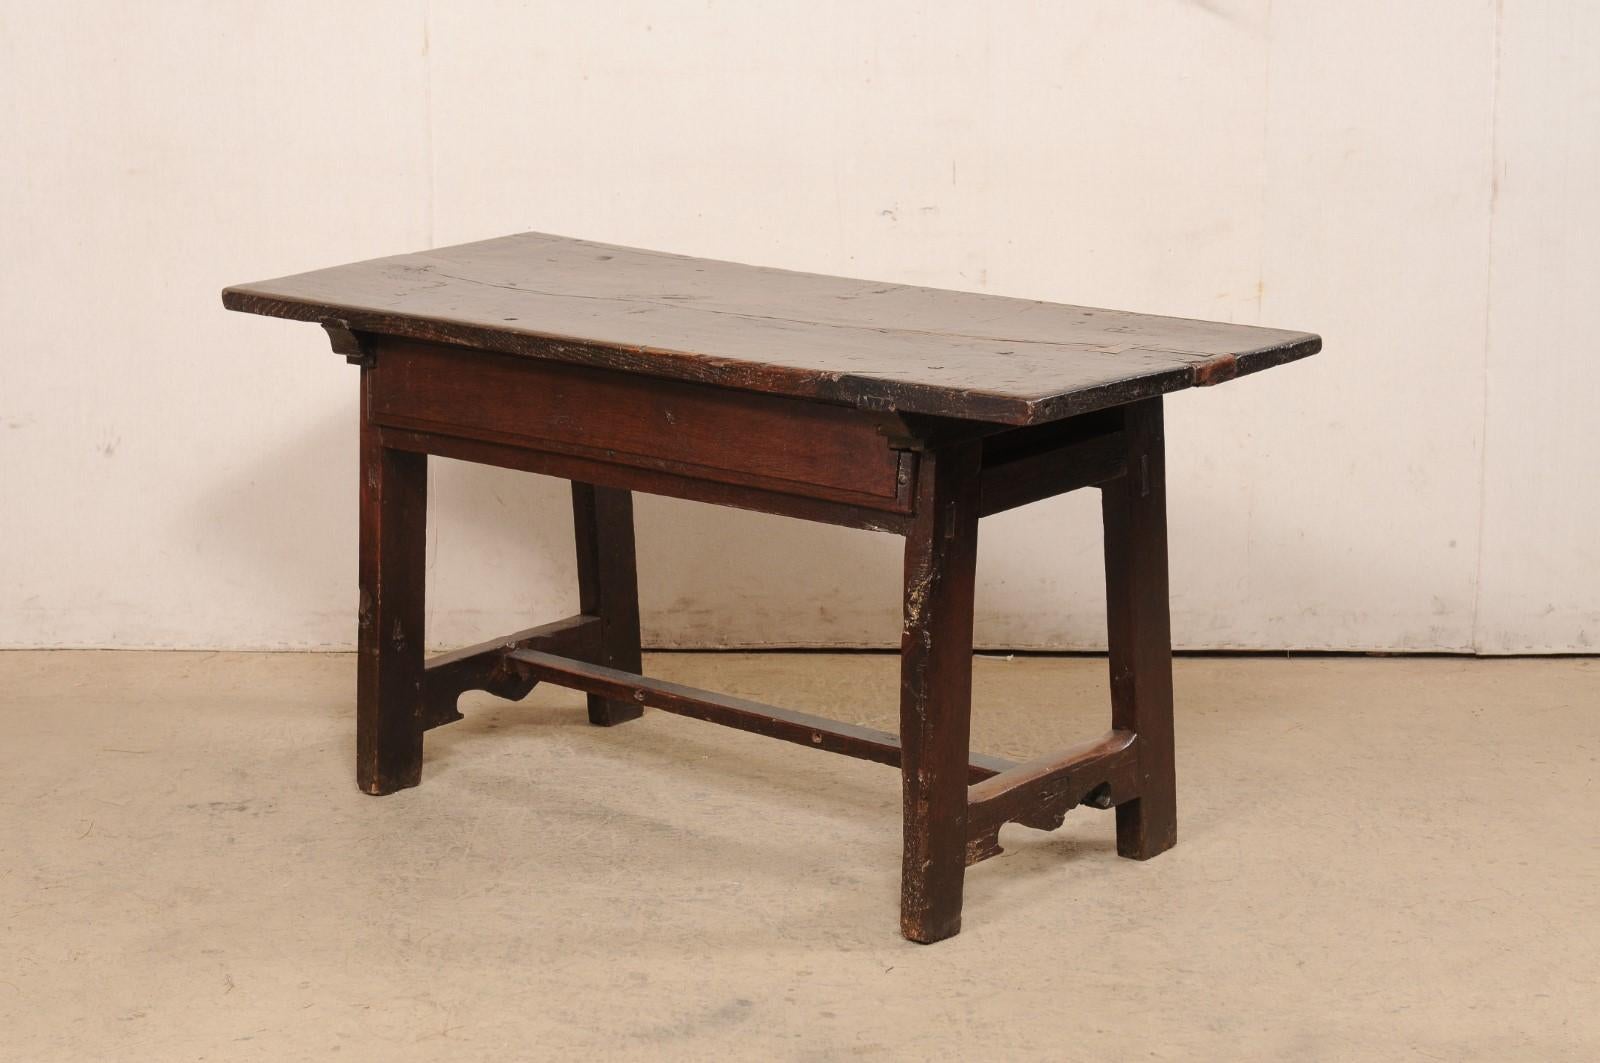 18th C. Spanish Beautifully Rustic Carved-Wood Trestle-Leg Table with Drawers For Sale 3